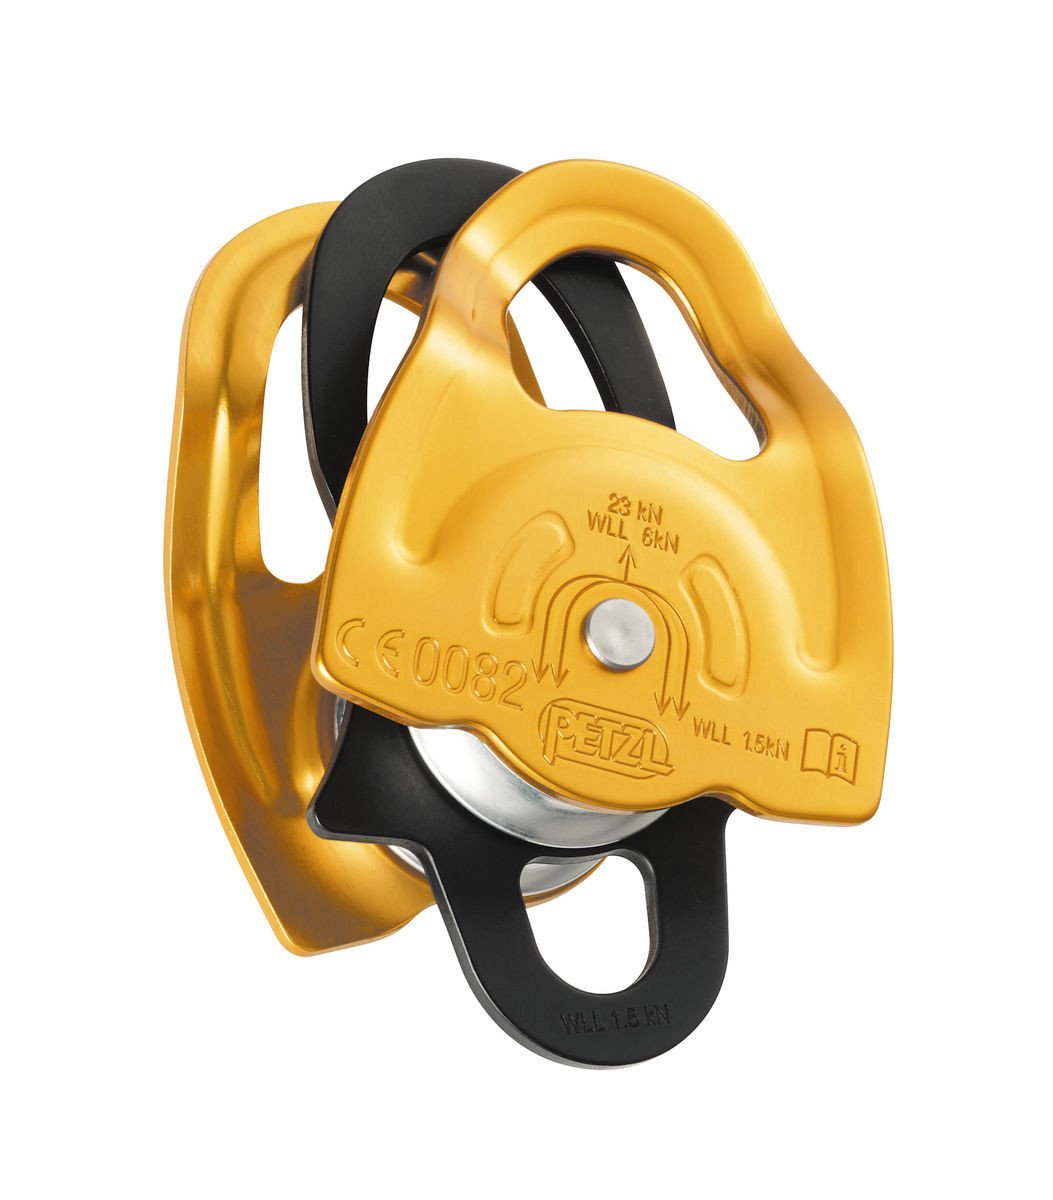 Petzl Gemini is a high efficiency, lightweight and compact double prusik pulley for setting up progress capture systems of a height safety mechanical advantage.